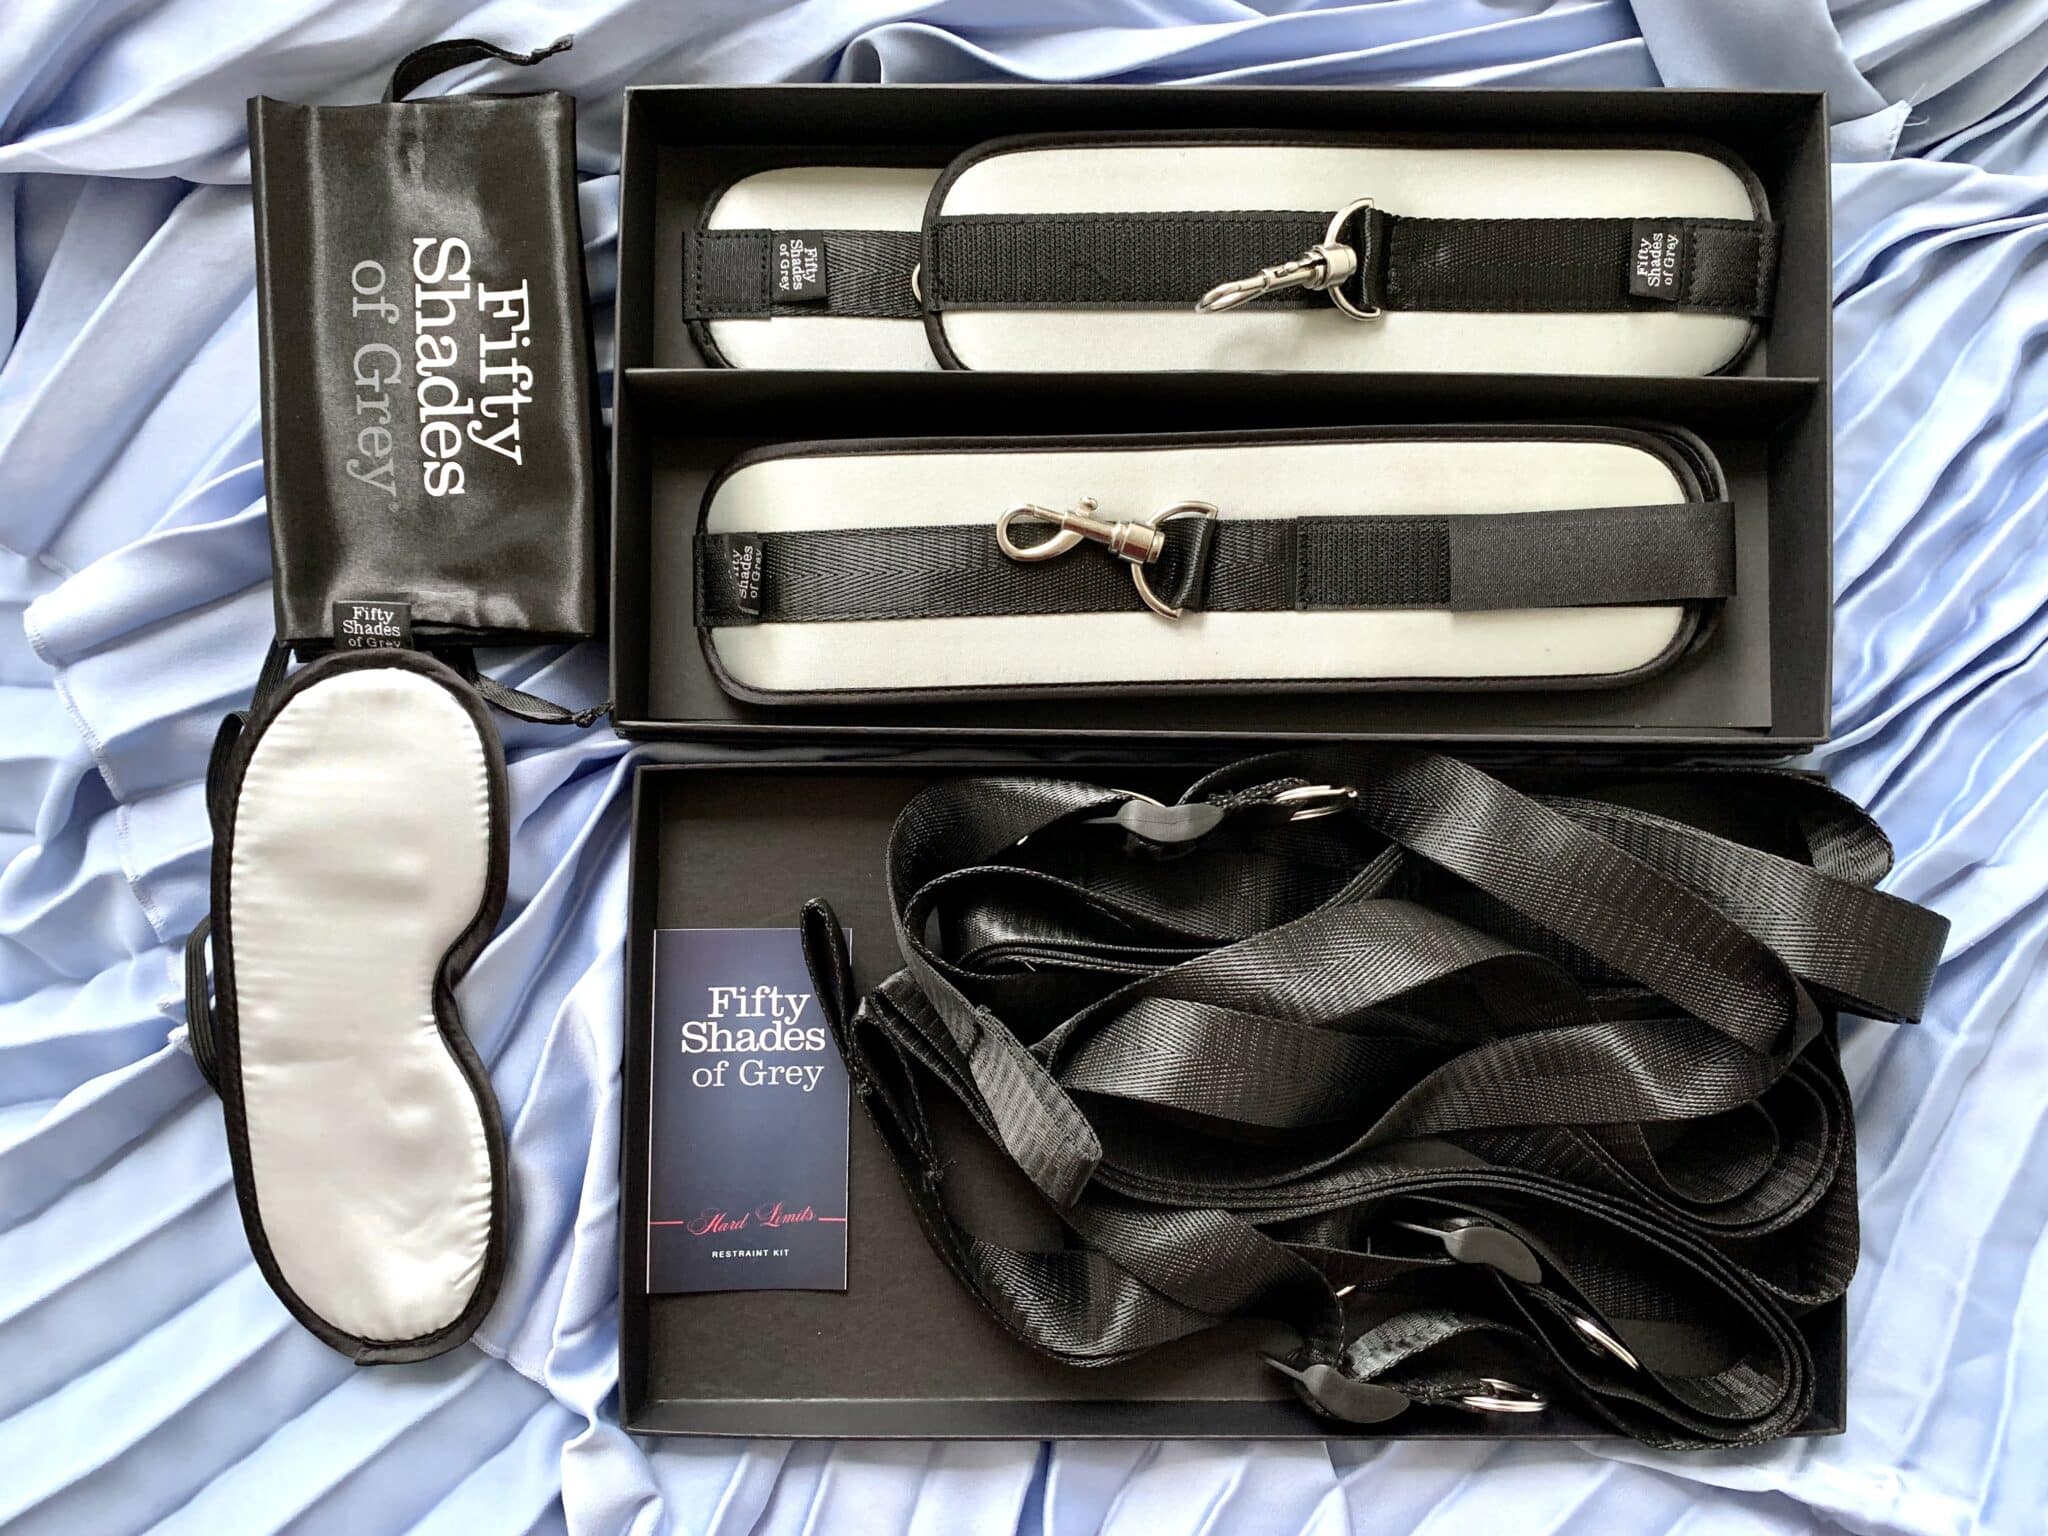 Fifty Shades of Grey Hard Limits Bed Restraint Kit			 			. Slide 6